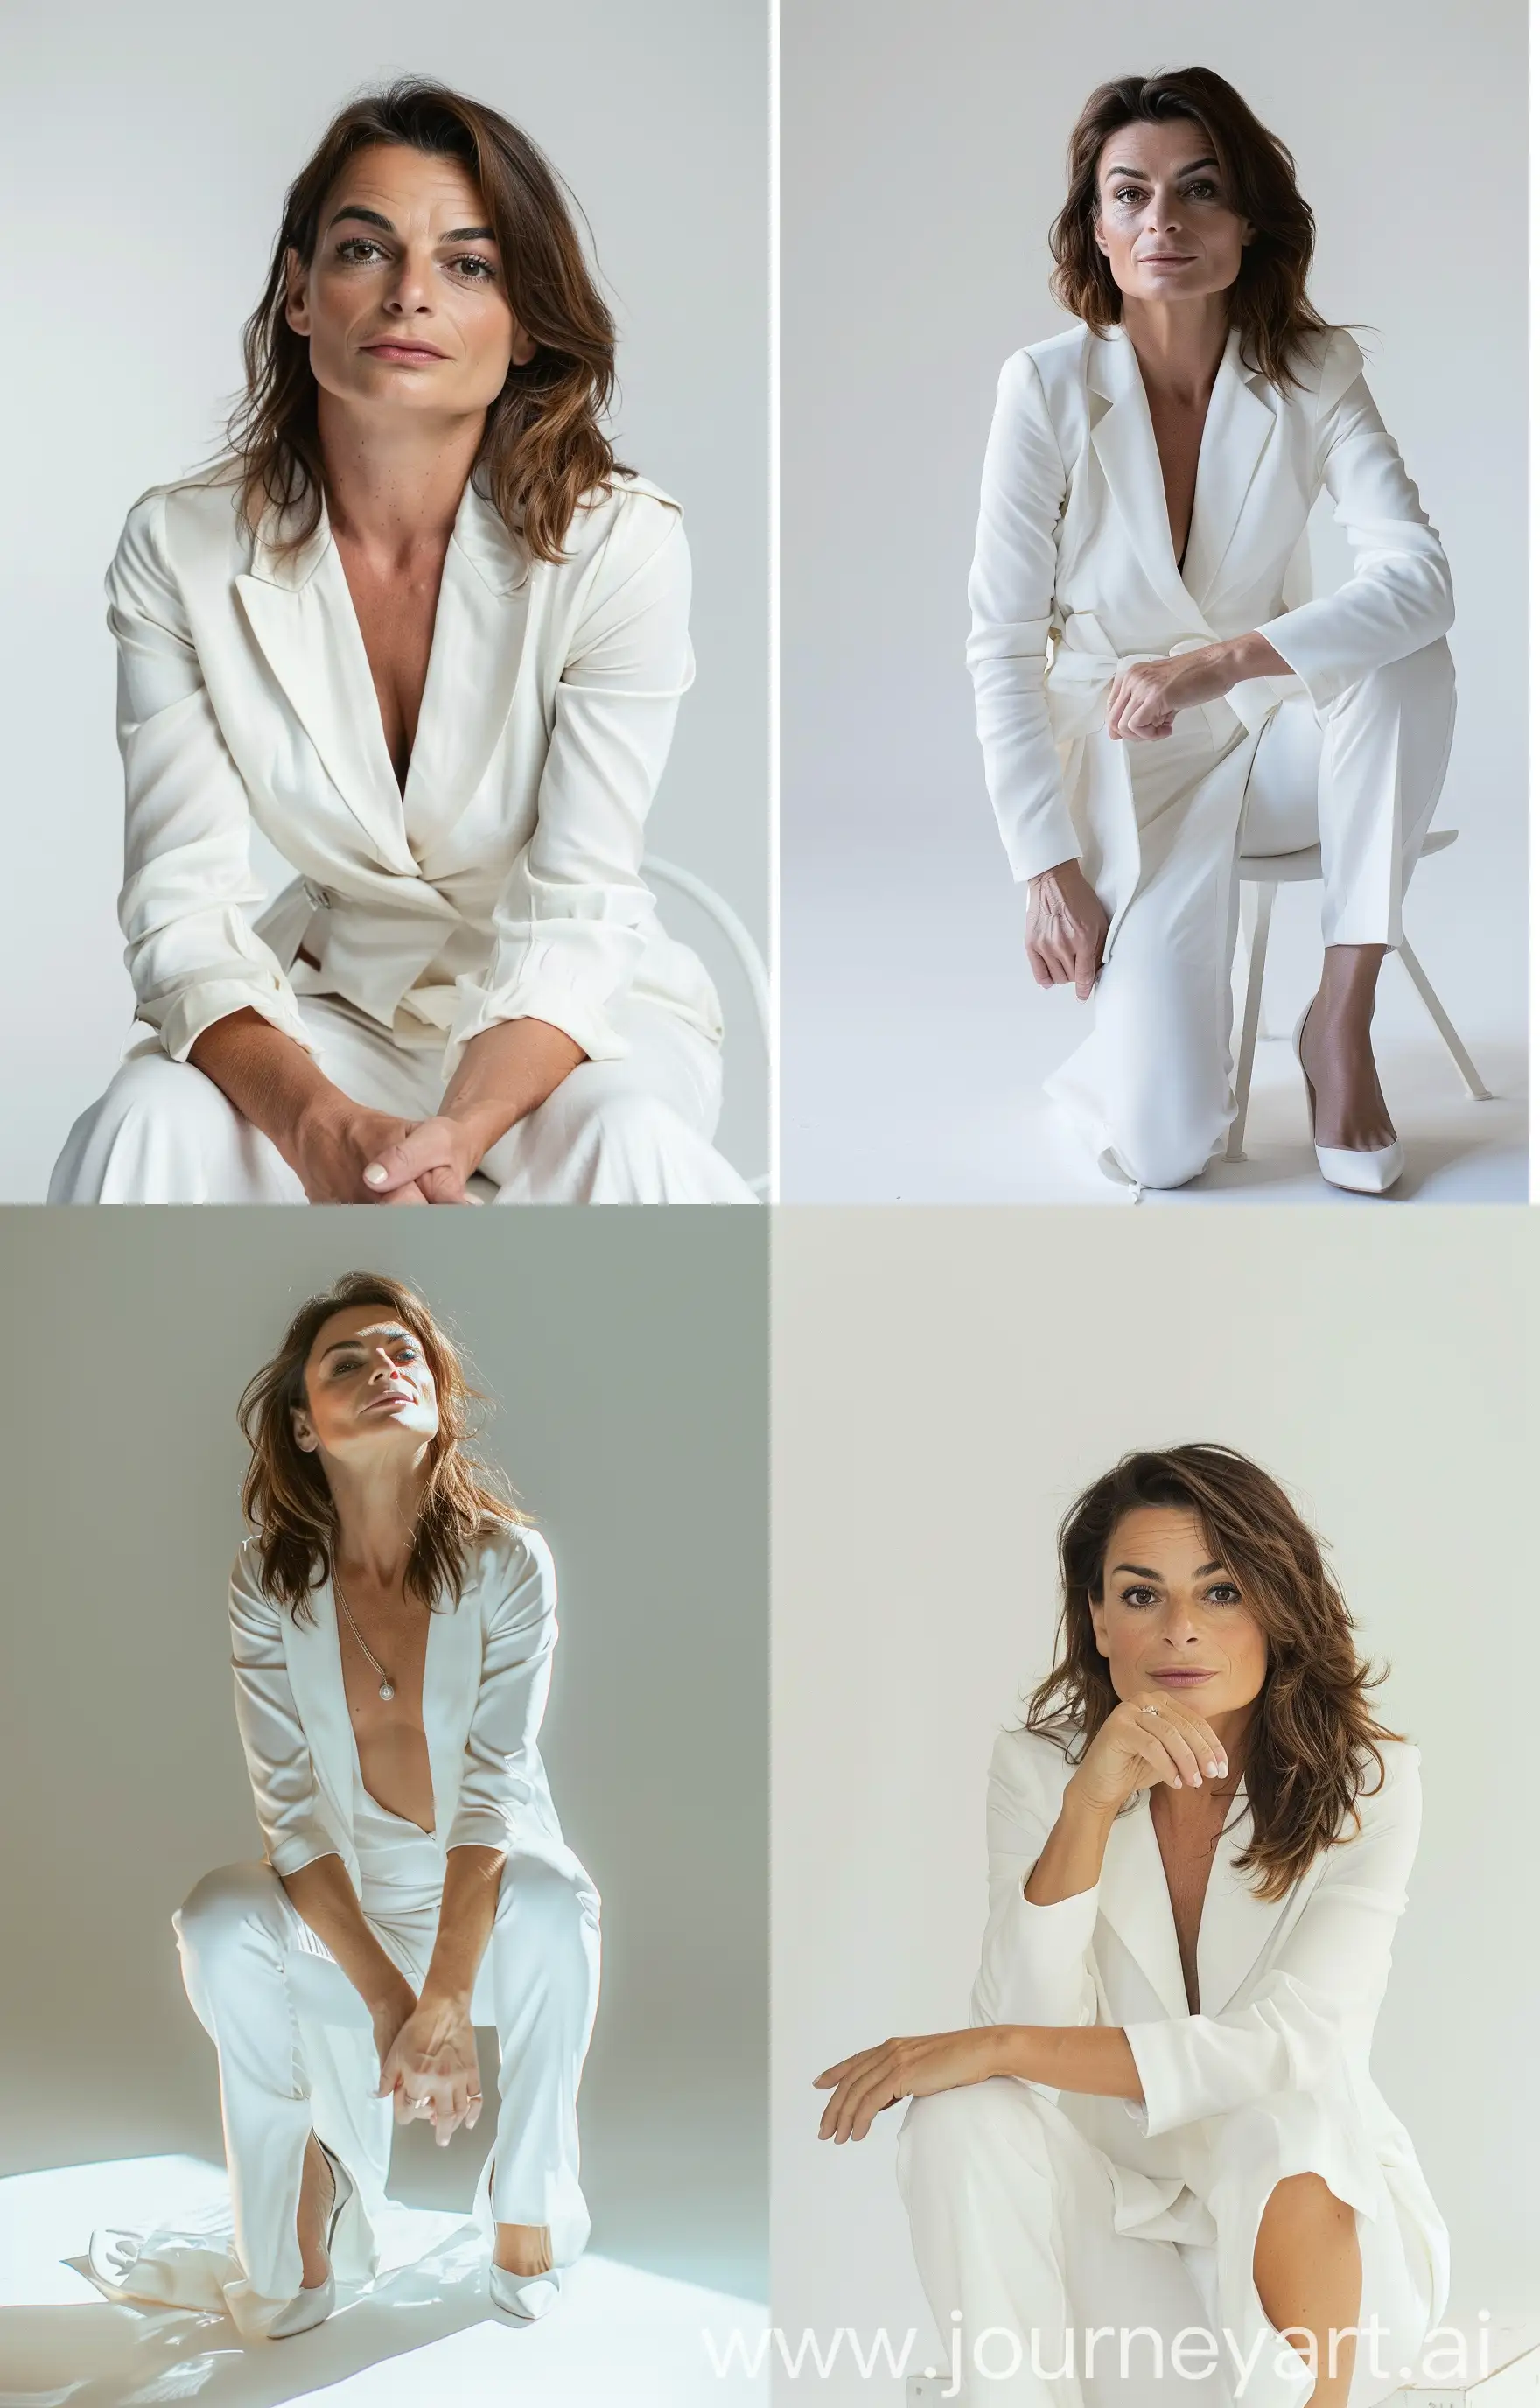 A studio photo with a white background of an elegant woman wearing white clothes and well illuminated, boss poses --cref https://cdn.discordapp.com/attachments/989268365870776411/1236676757818441858/tothkatinkaklara_Take_a_photo_of_a_woman_talking_about_the_news_7c311c02-3dfe-4077-ac7a-20f98359694e.png?ex=6638e07b&is=66378efb&hm=a4ef73096f61c0e3b3d04b3dc867797135f4303cfae9f8b34909522e49a3708e& --v 6 --style raw --ar 16:25 --cw 0